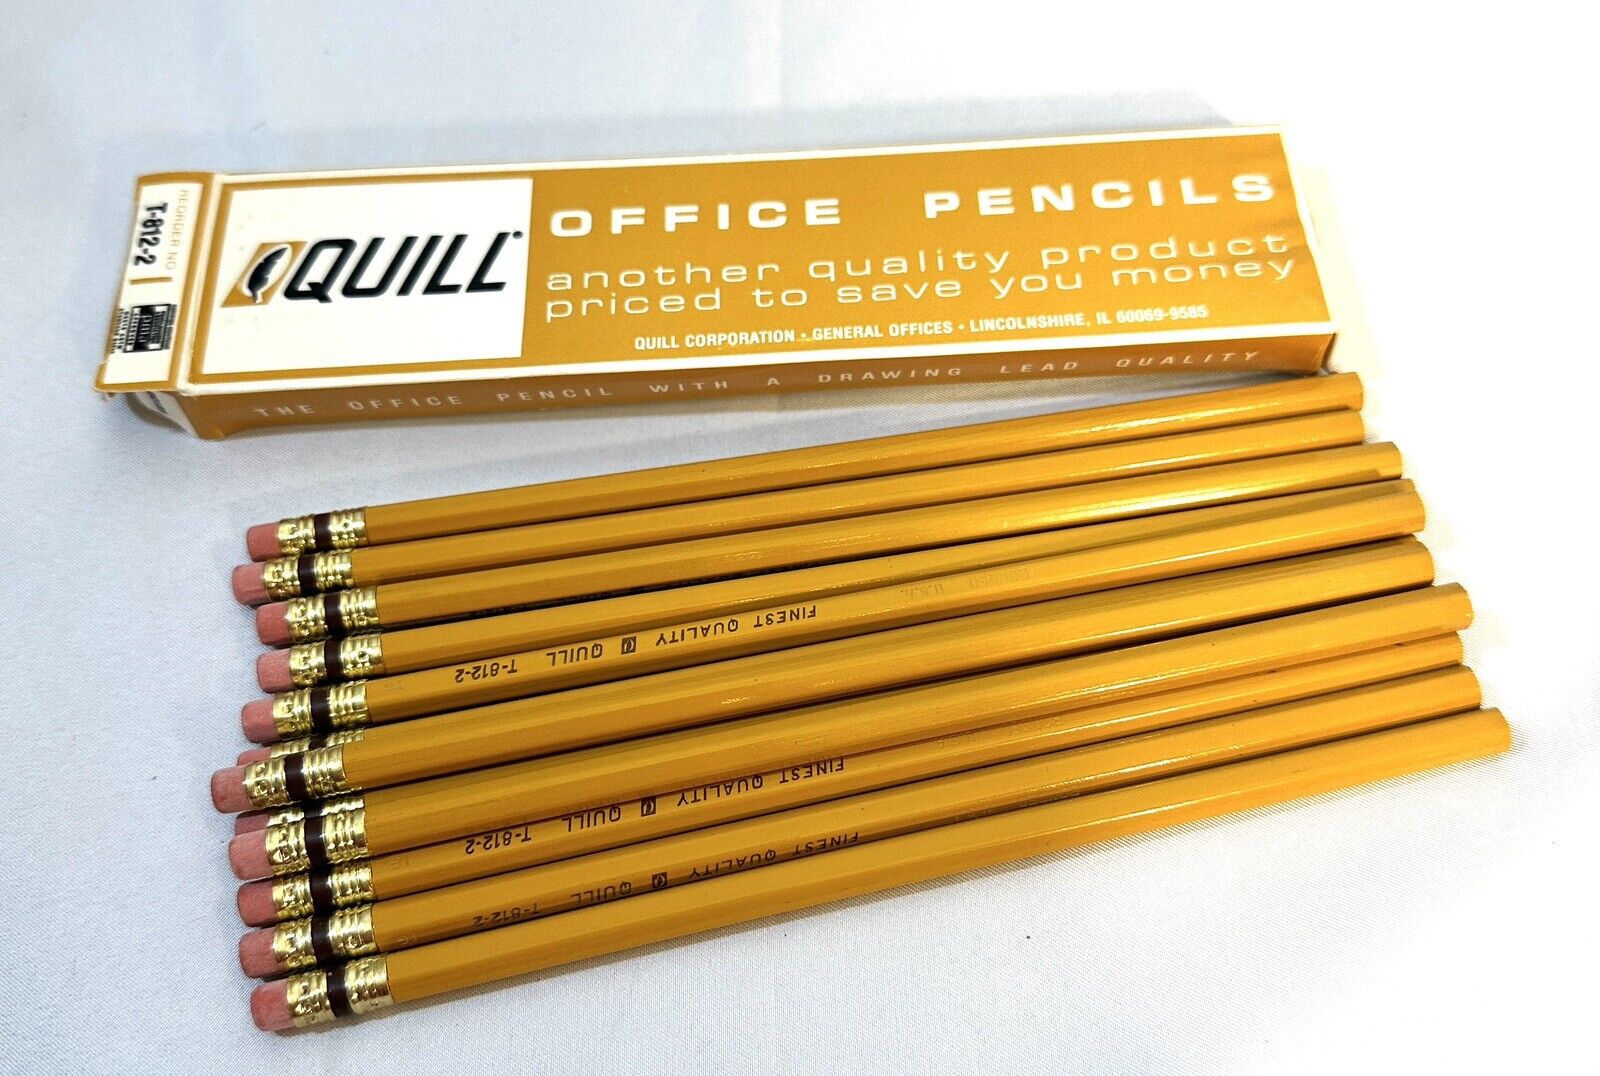 Vintage Box Of 12 Quill Office Pencils Unsharpened T-812-2 Quality Lead Pencil